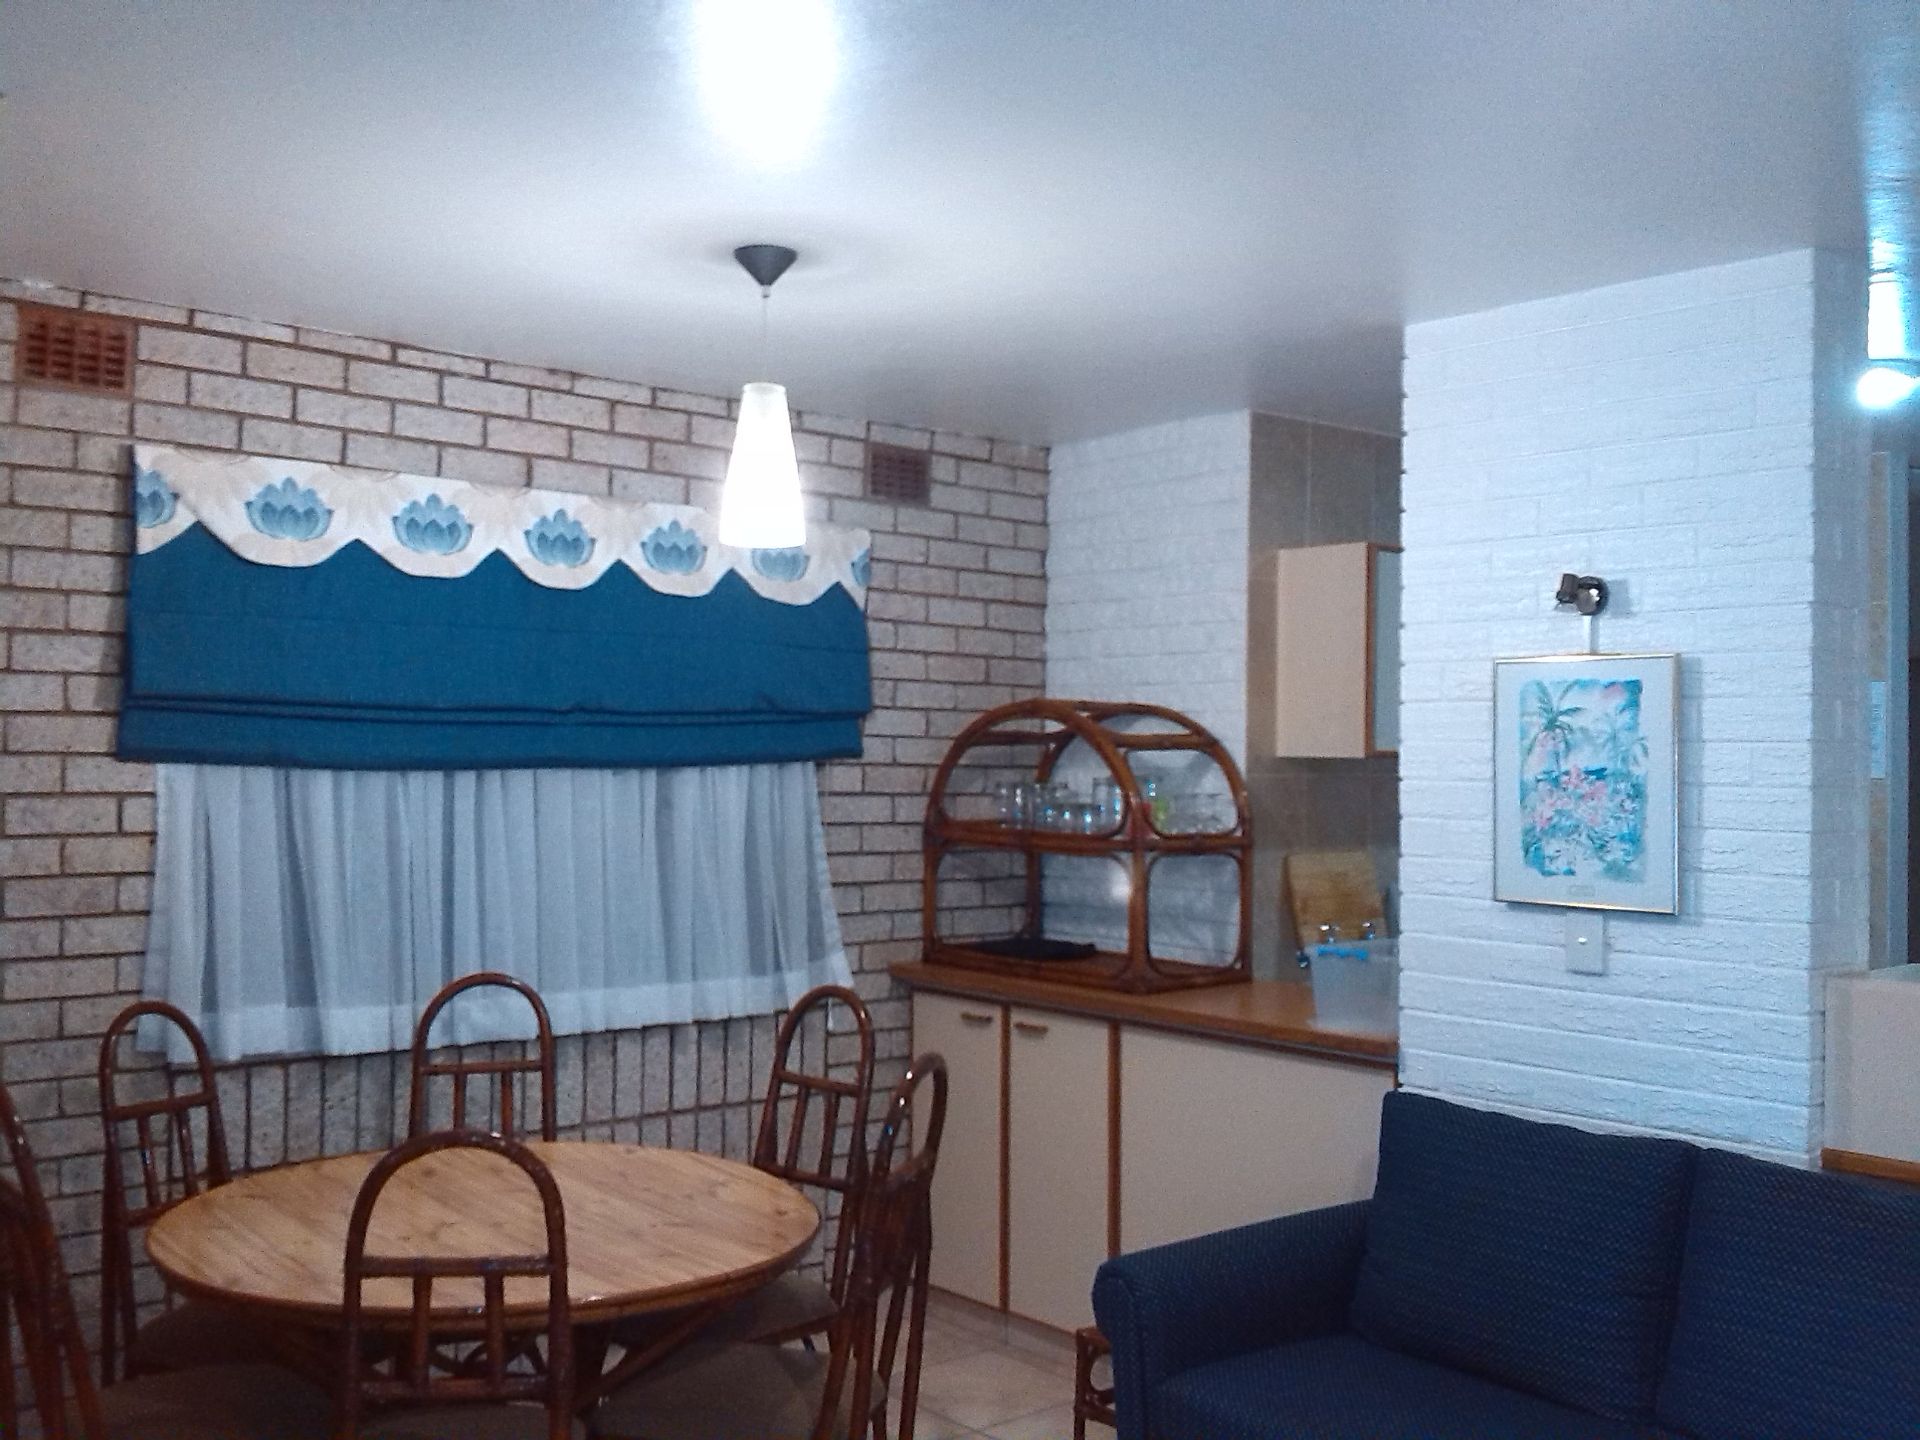 Pearly Shells - 3 Beds (8 Sleepers Max)  . Date - 20/05/2016 - 27/05/2016 - (Shareblock) - Image 14 of 32